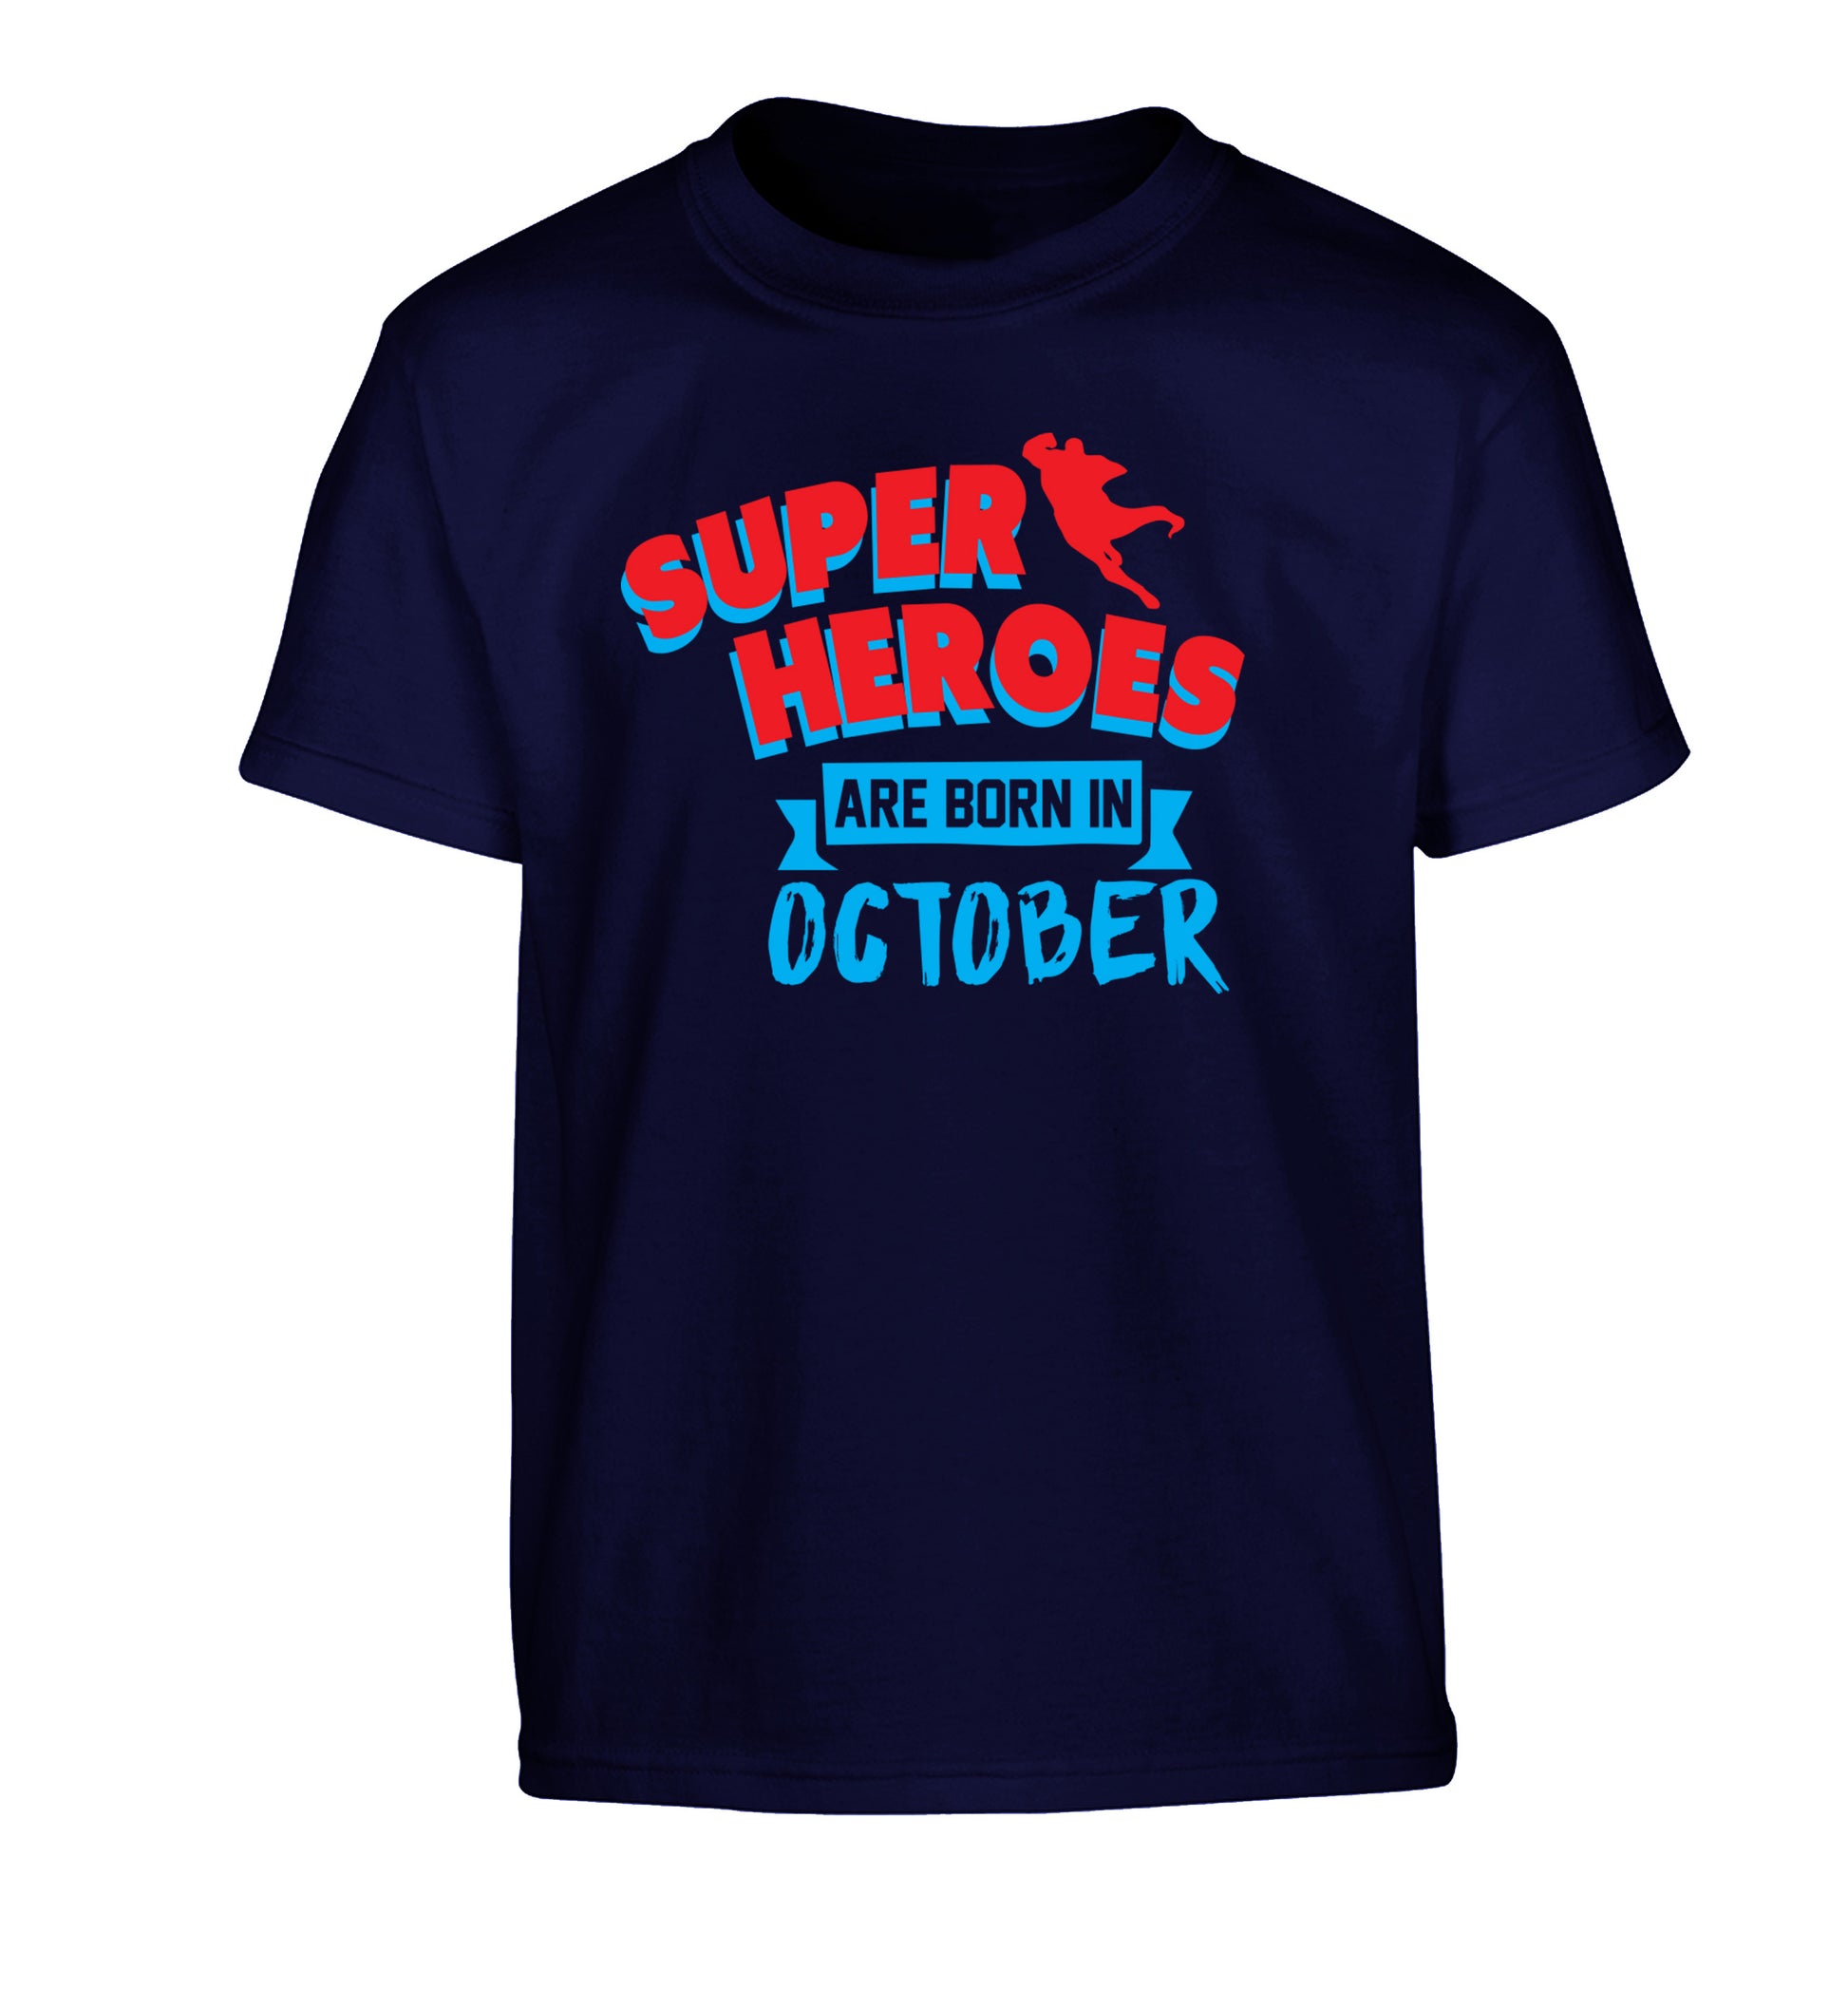 Superheroes are born in October Children's navy Tshirt 12-13 Years